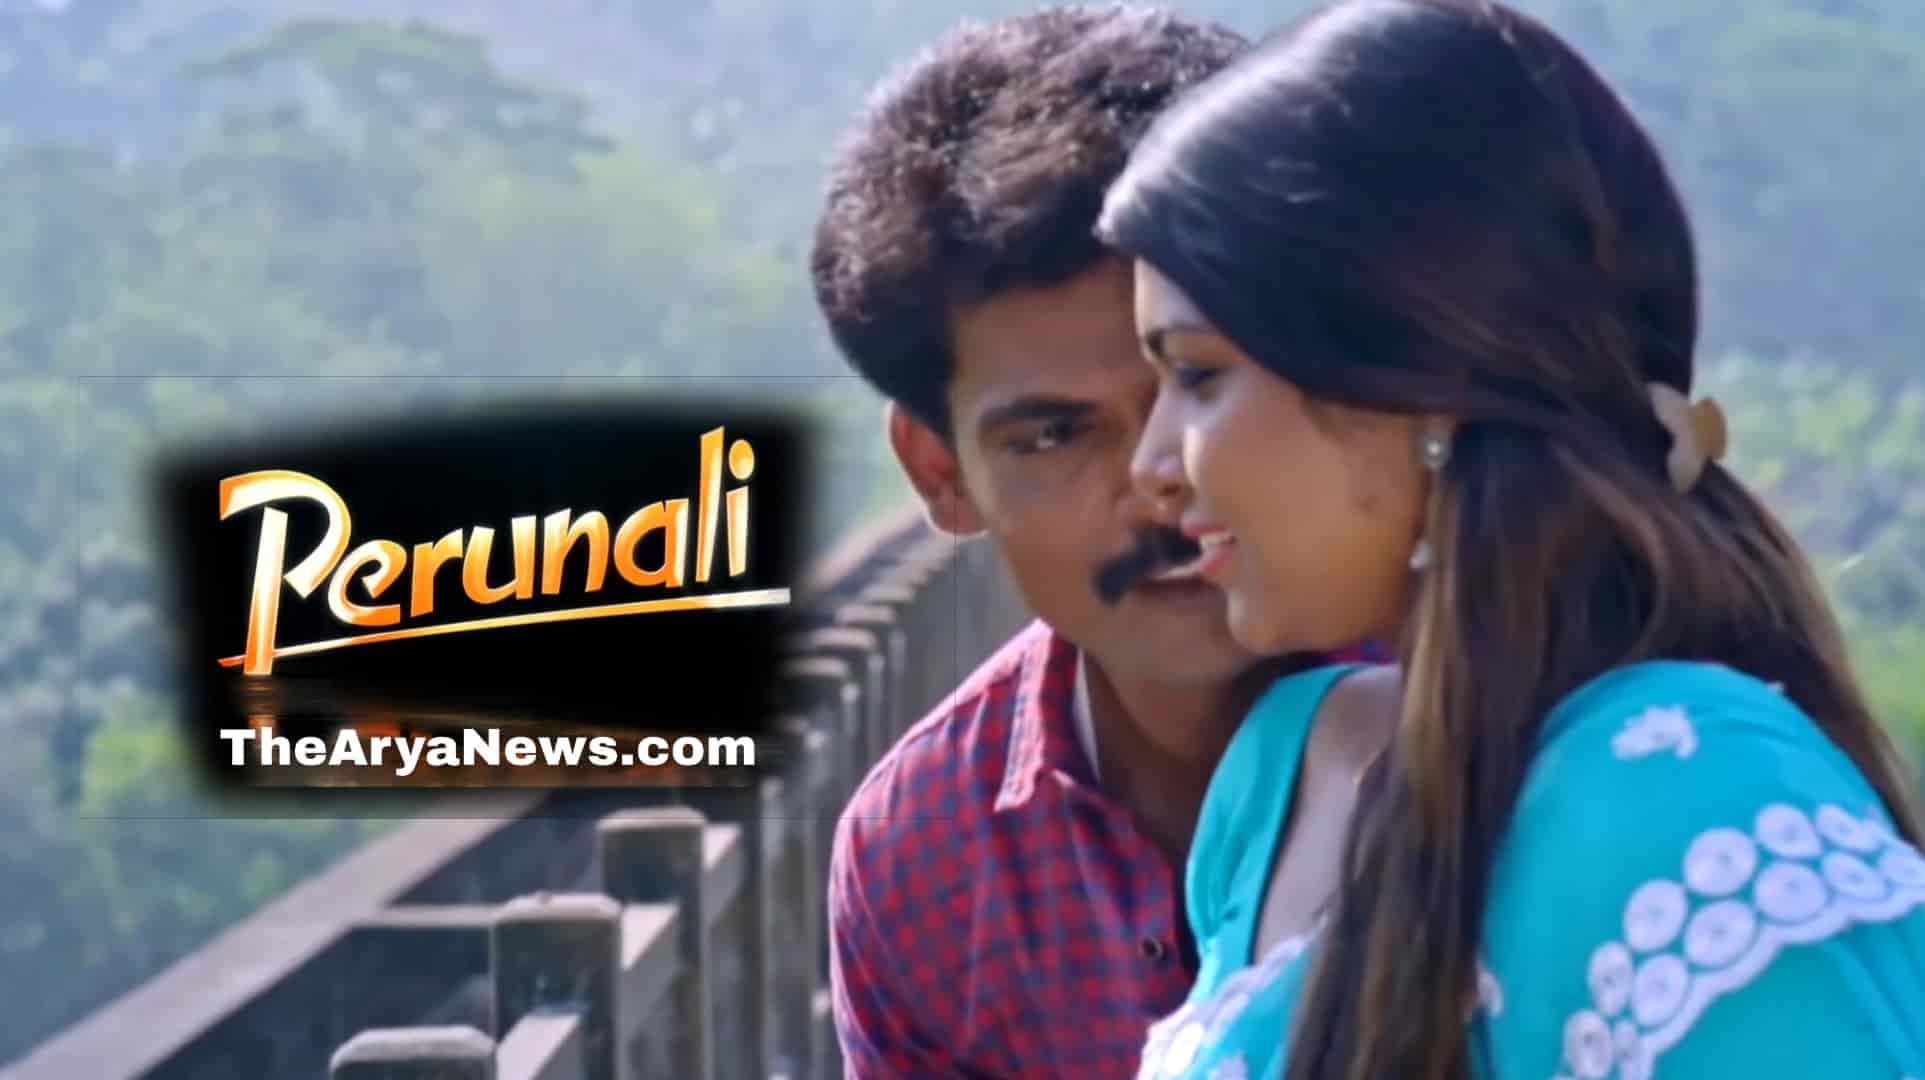 [PERUNALI] full movie Download leaked on TamilRockers 1080p [Review]